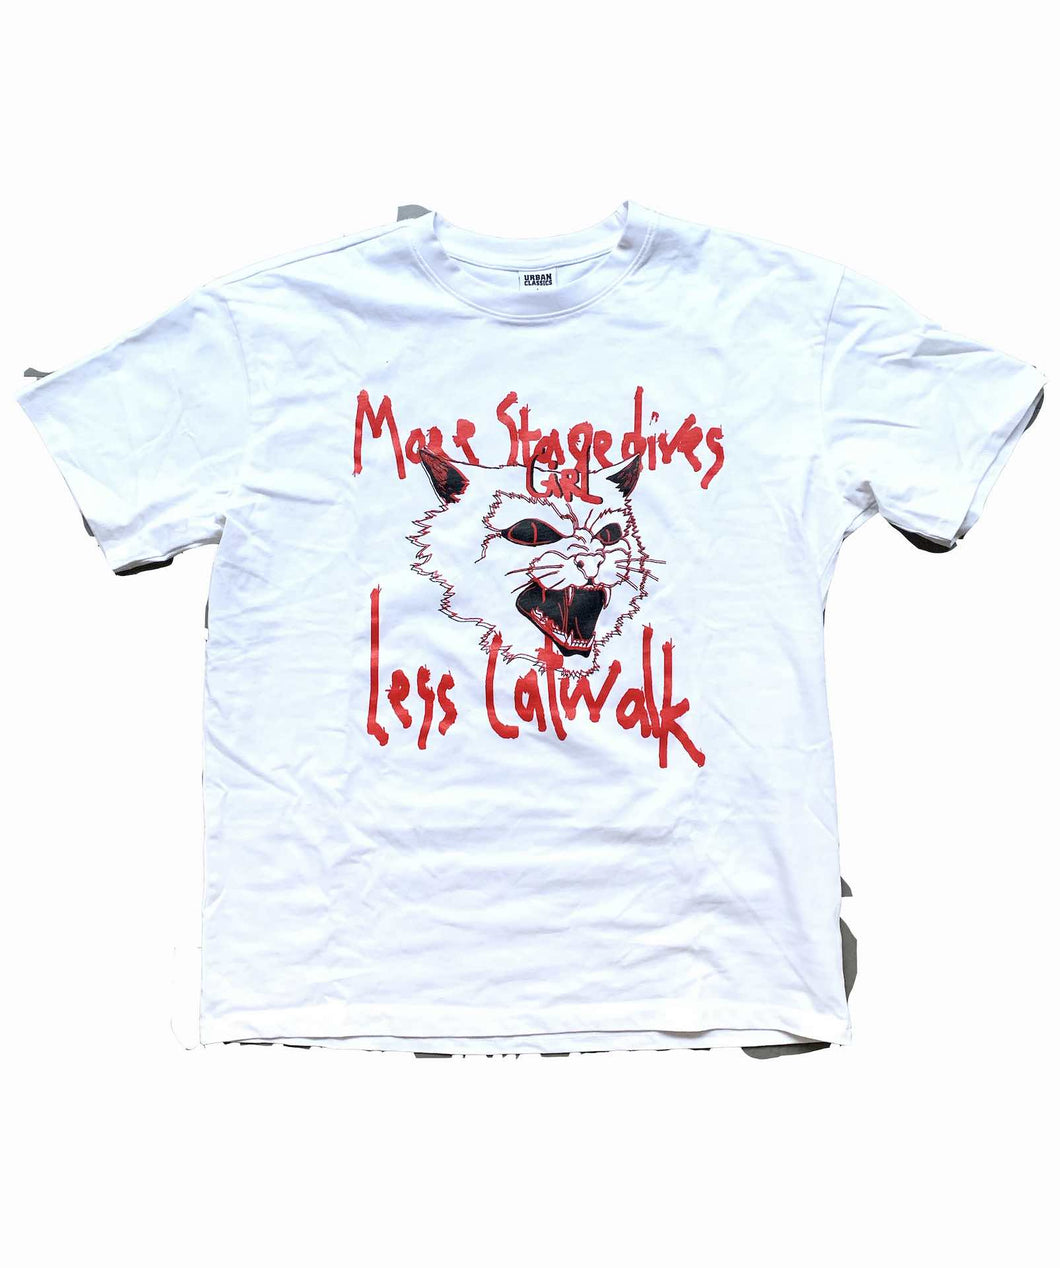 T-Shirt More Stagedives White Red